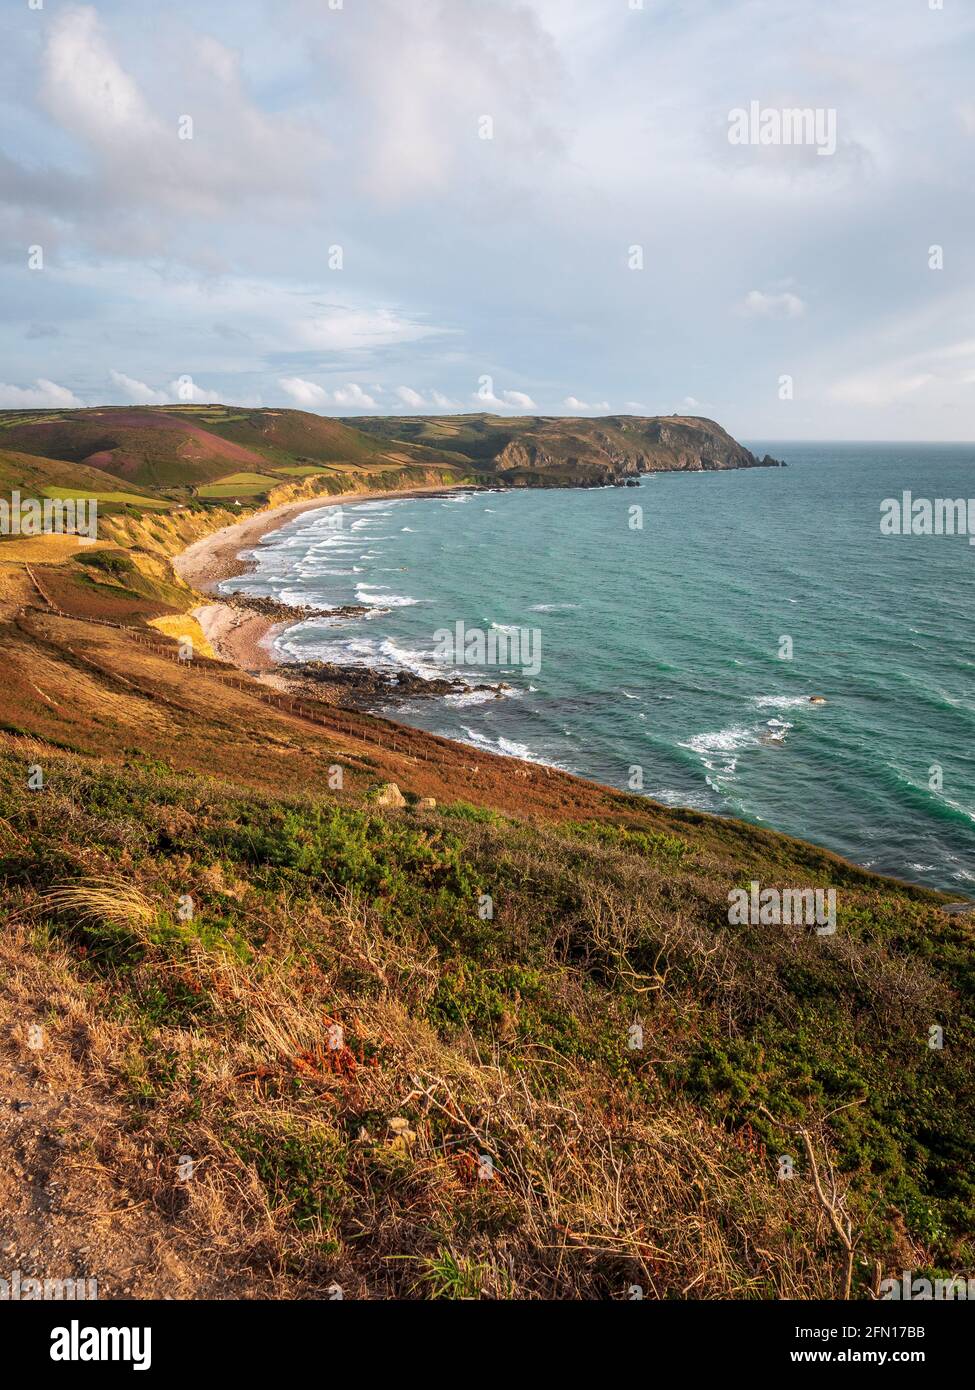 Wild landscape in warm tones and colours Ecalgrain bay in Normandy, France. Stock Photo